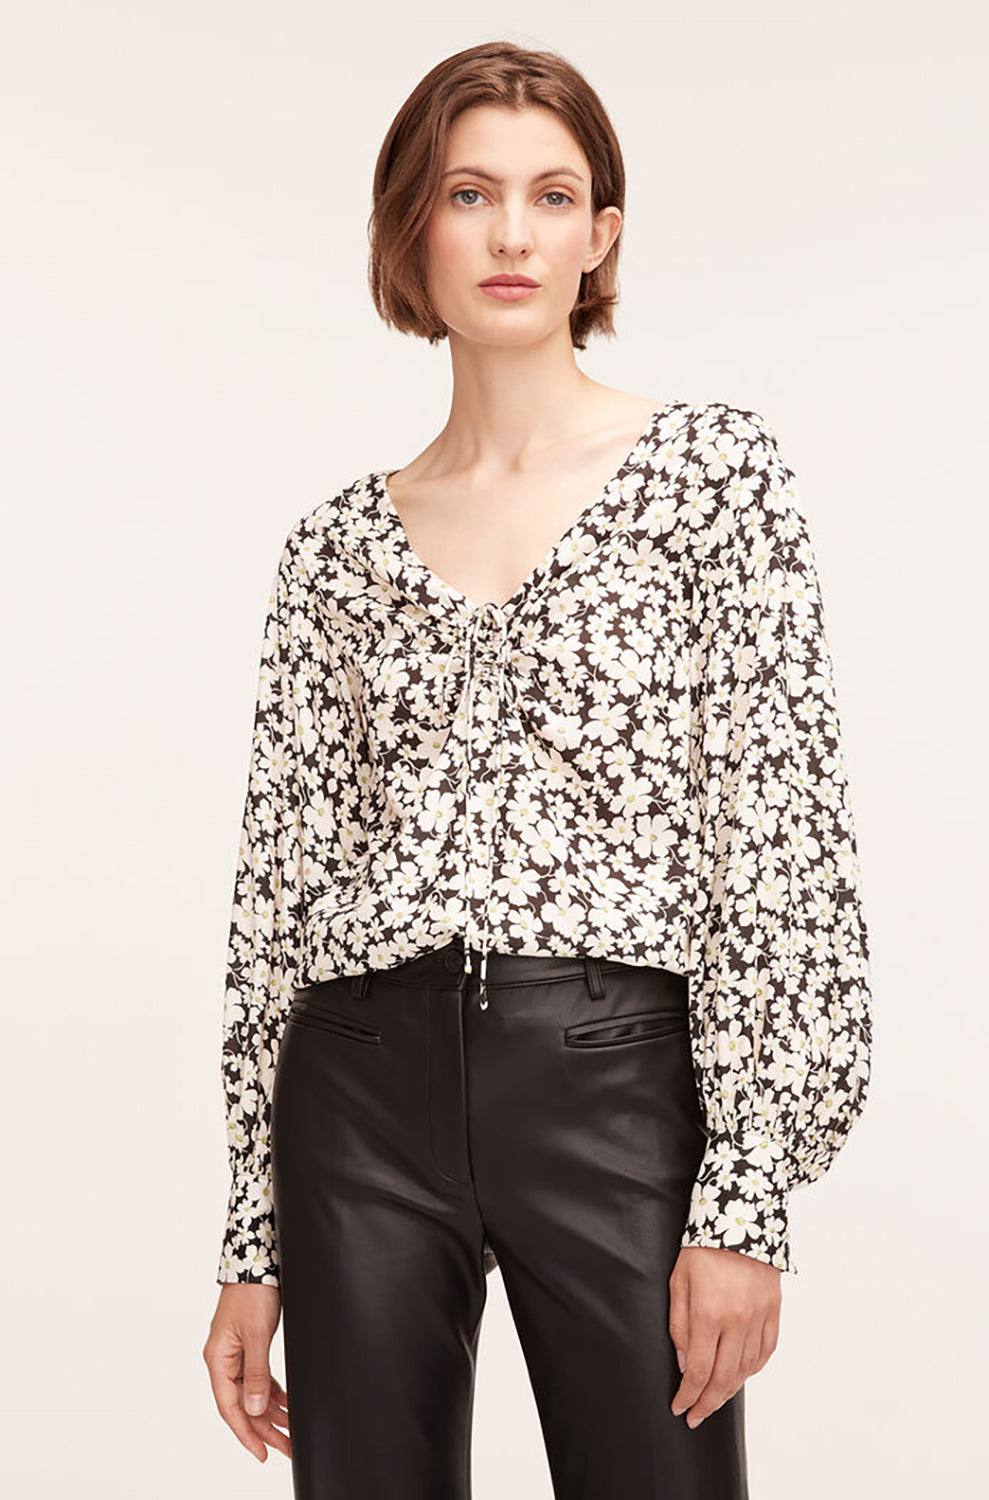 Model wearing Rebecca Taylor's Drawstring Long Sleeve Blouse in Paige Fleur Black Combo. Model styles the blouse with high-waisted leather pants.